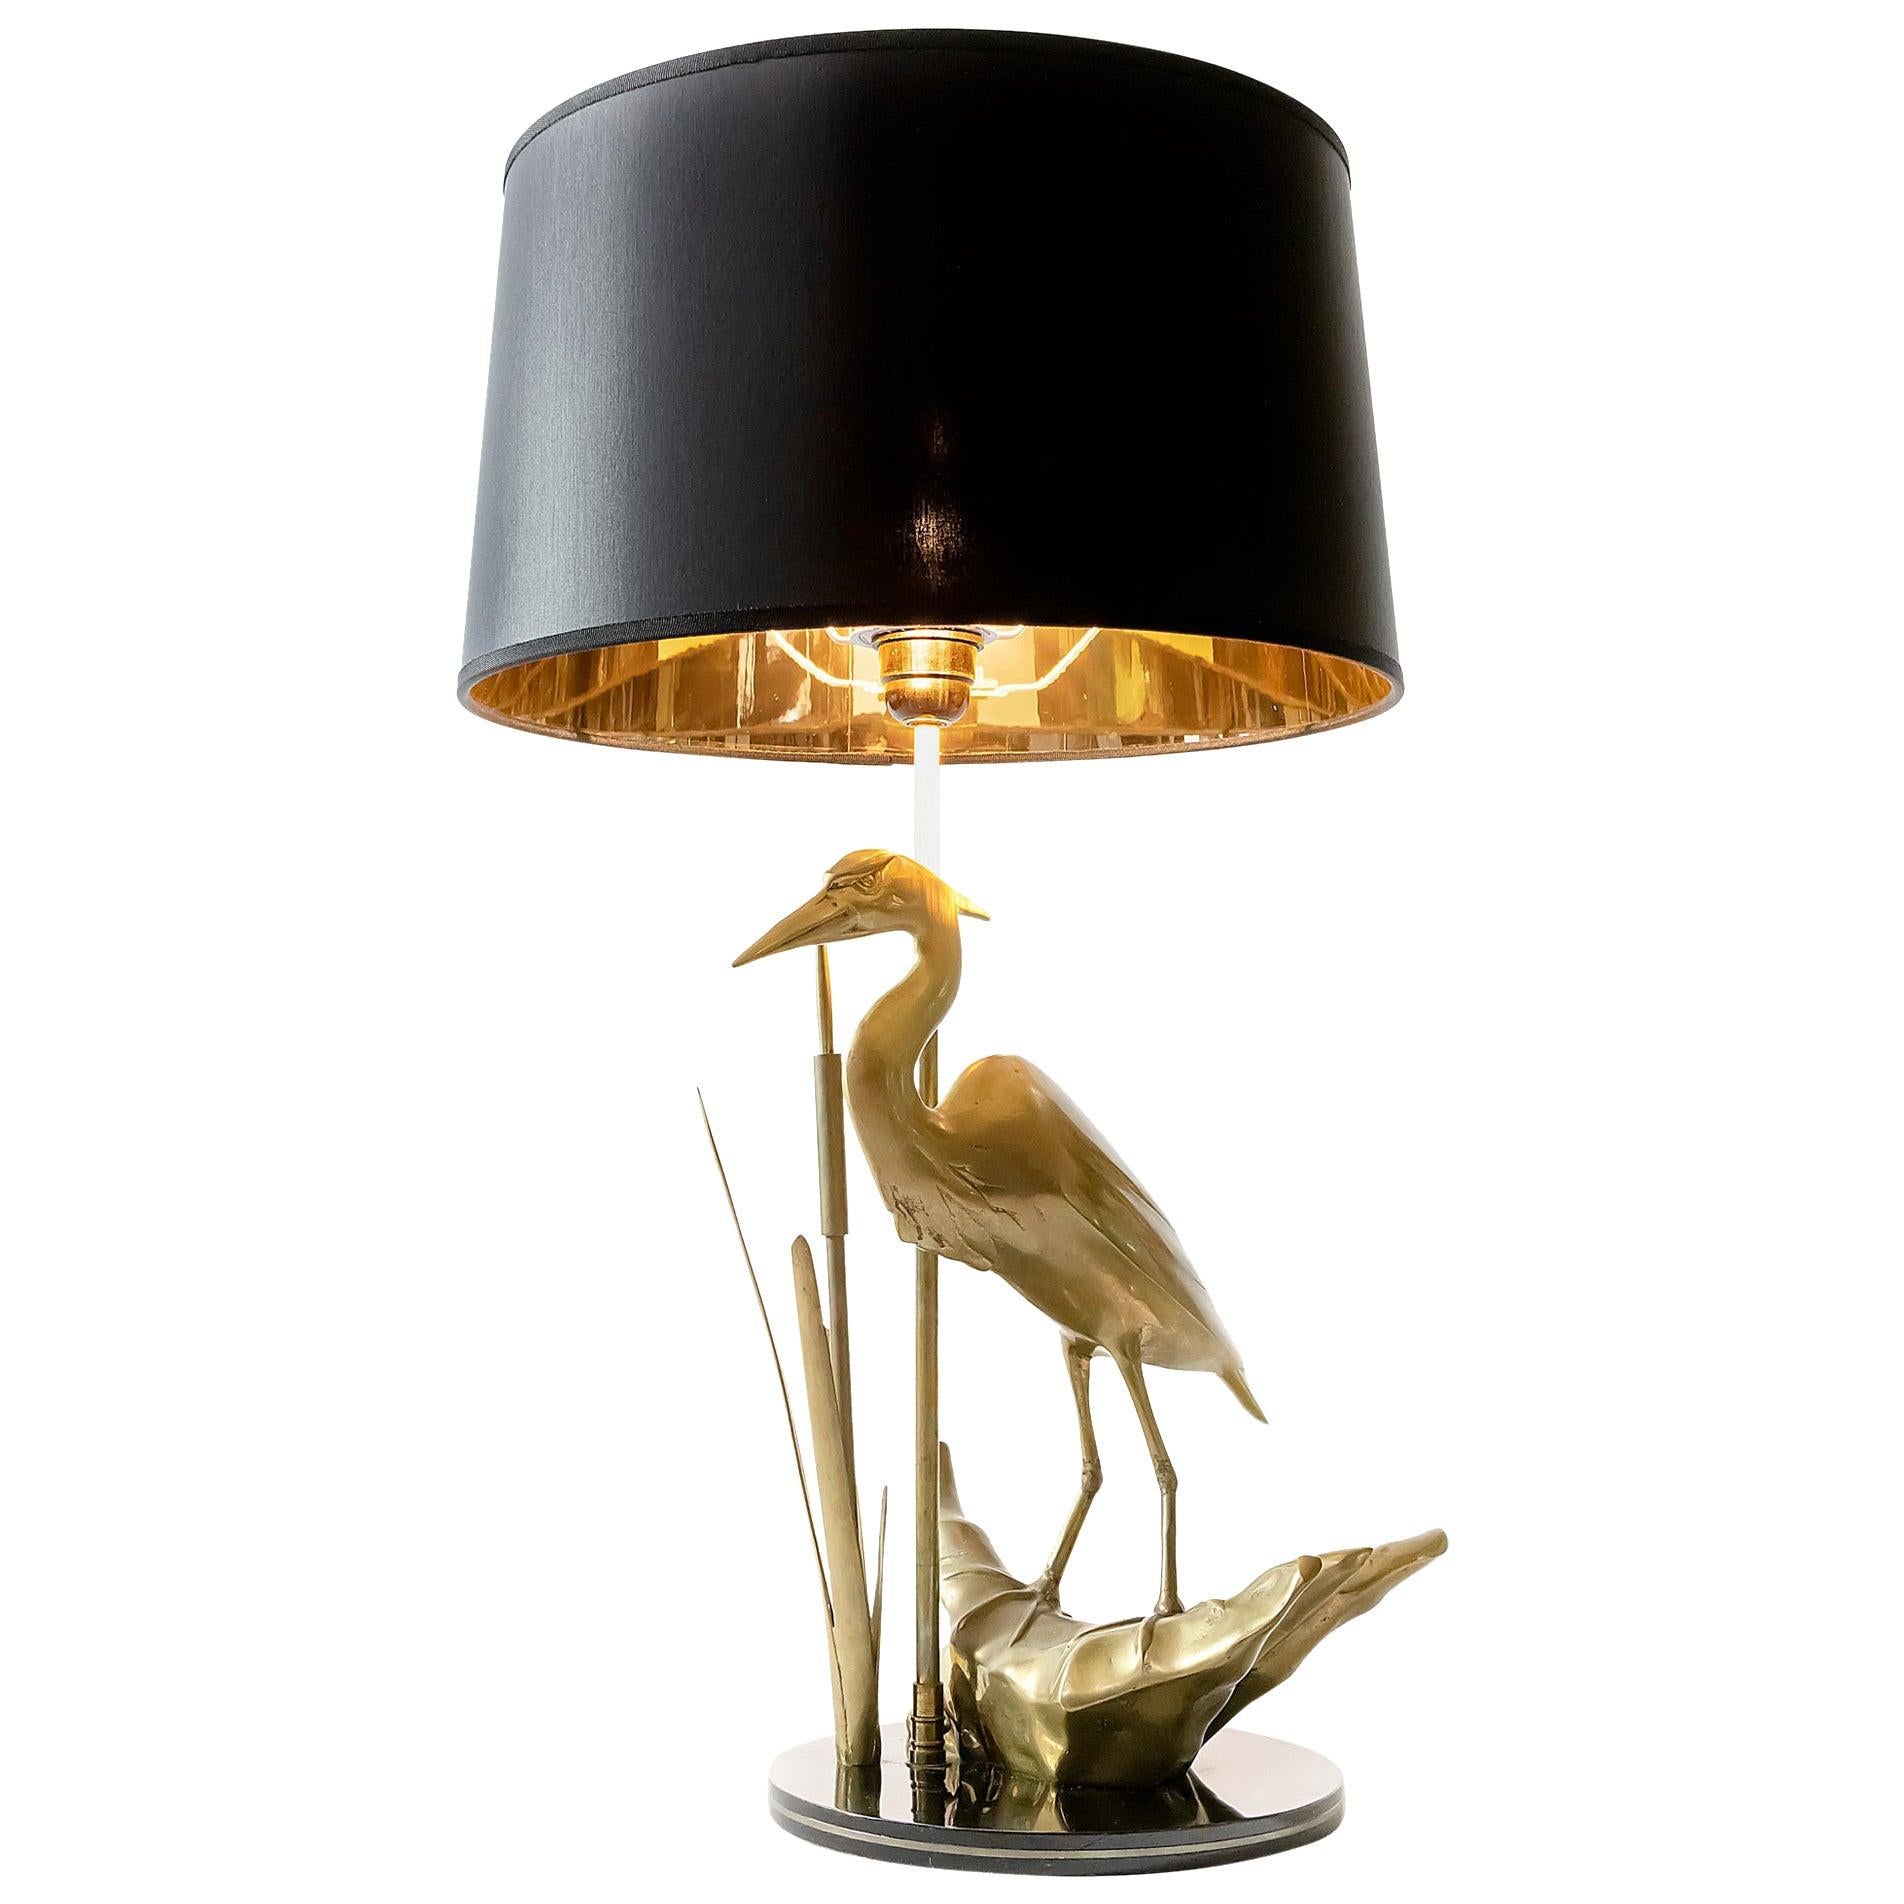 Vintage French Brass Table Lamp with Bird Figure by Maison Charles